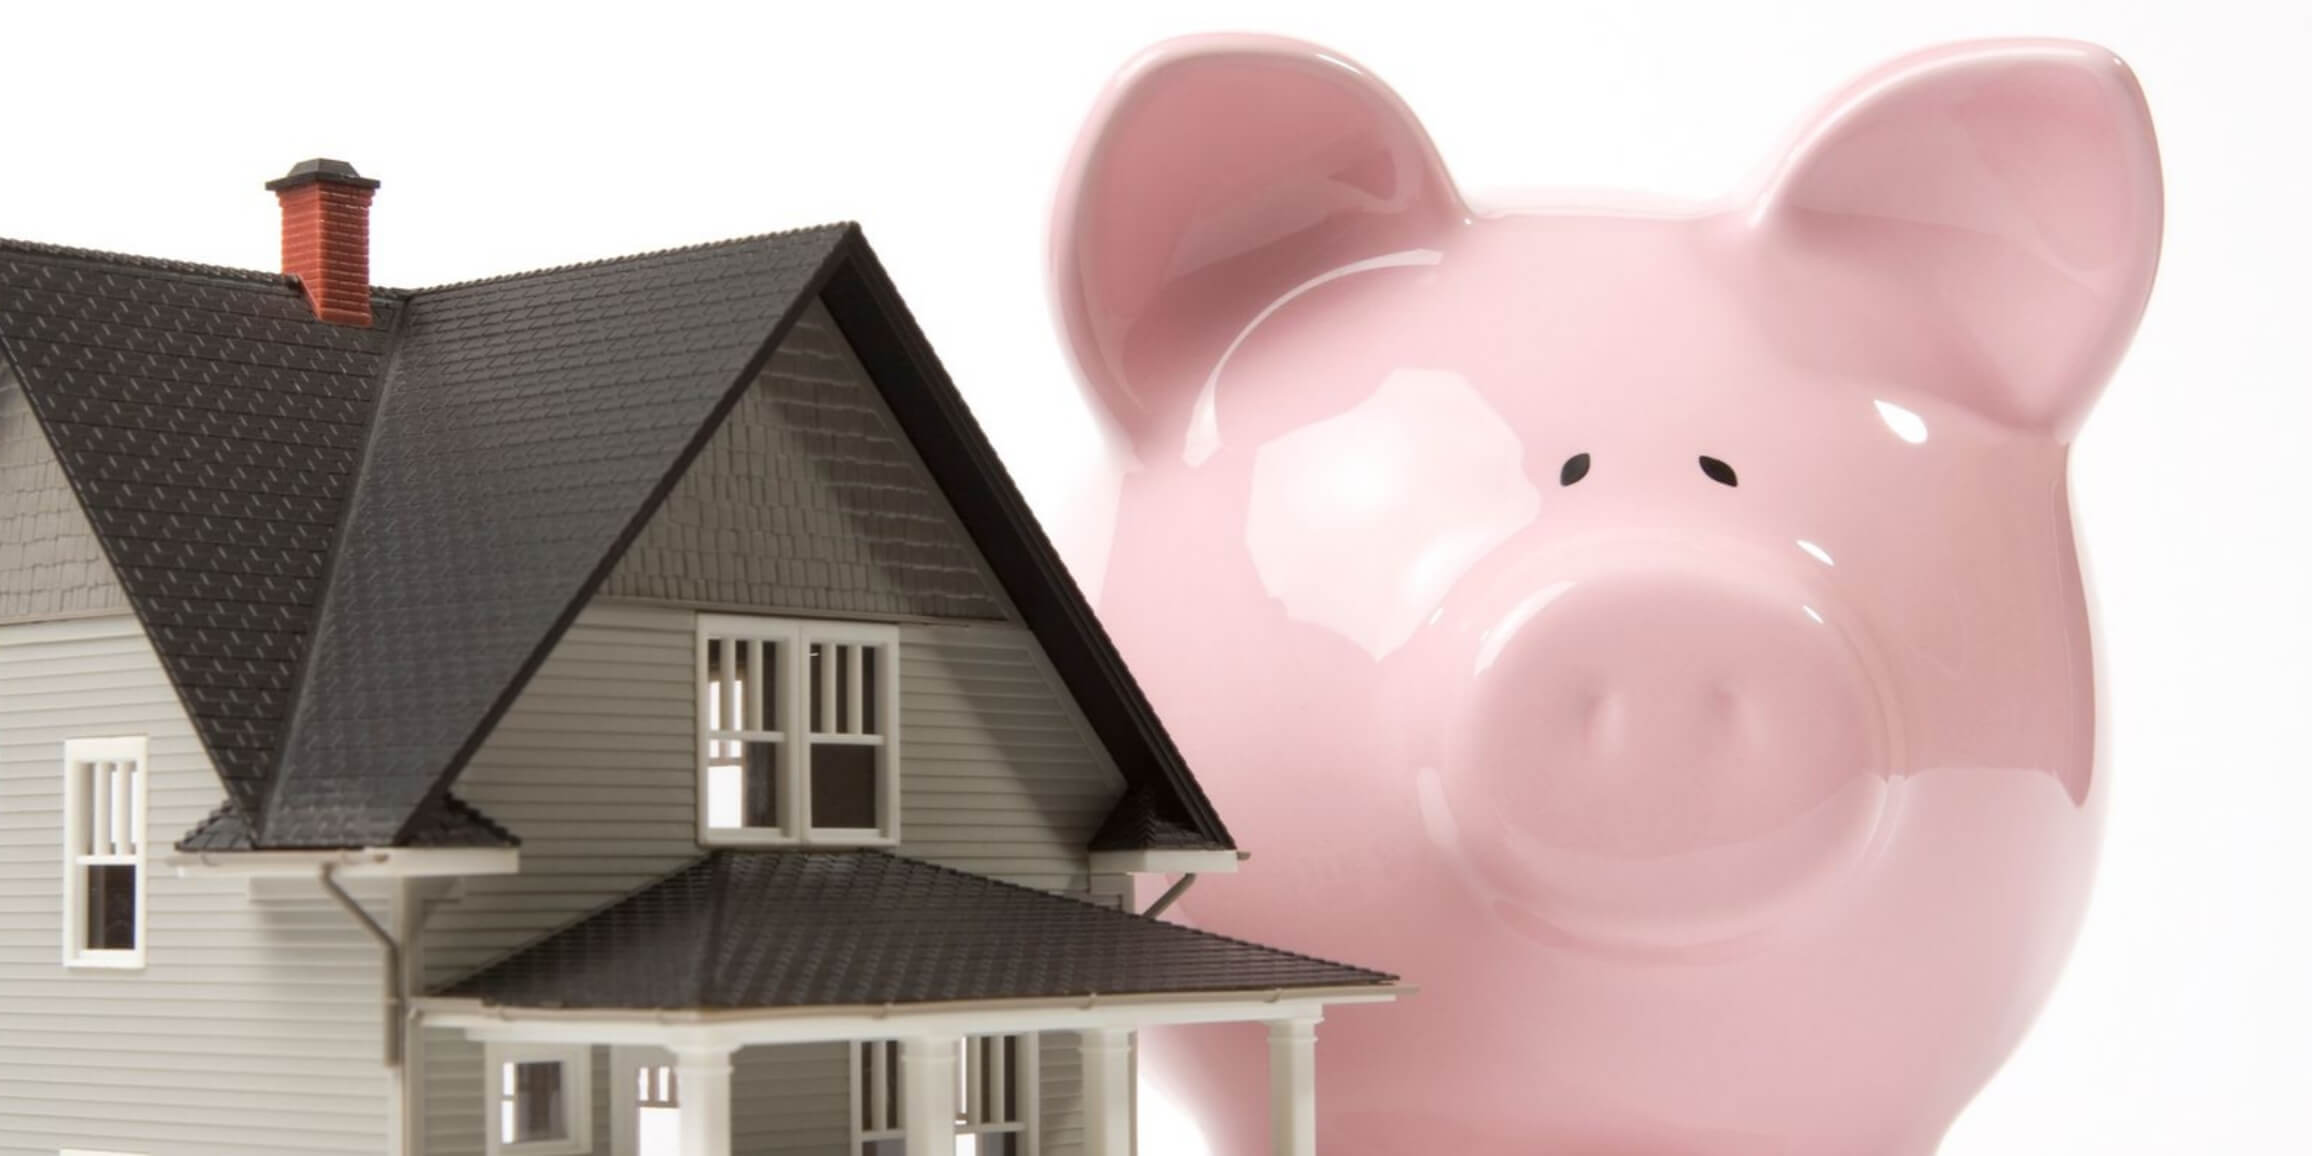 make January's mortgage payment